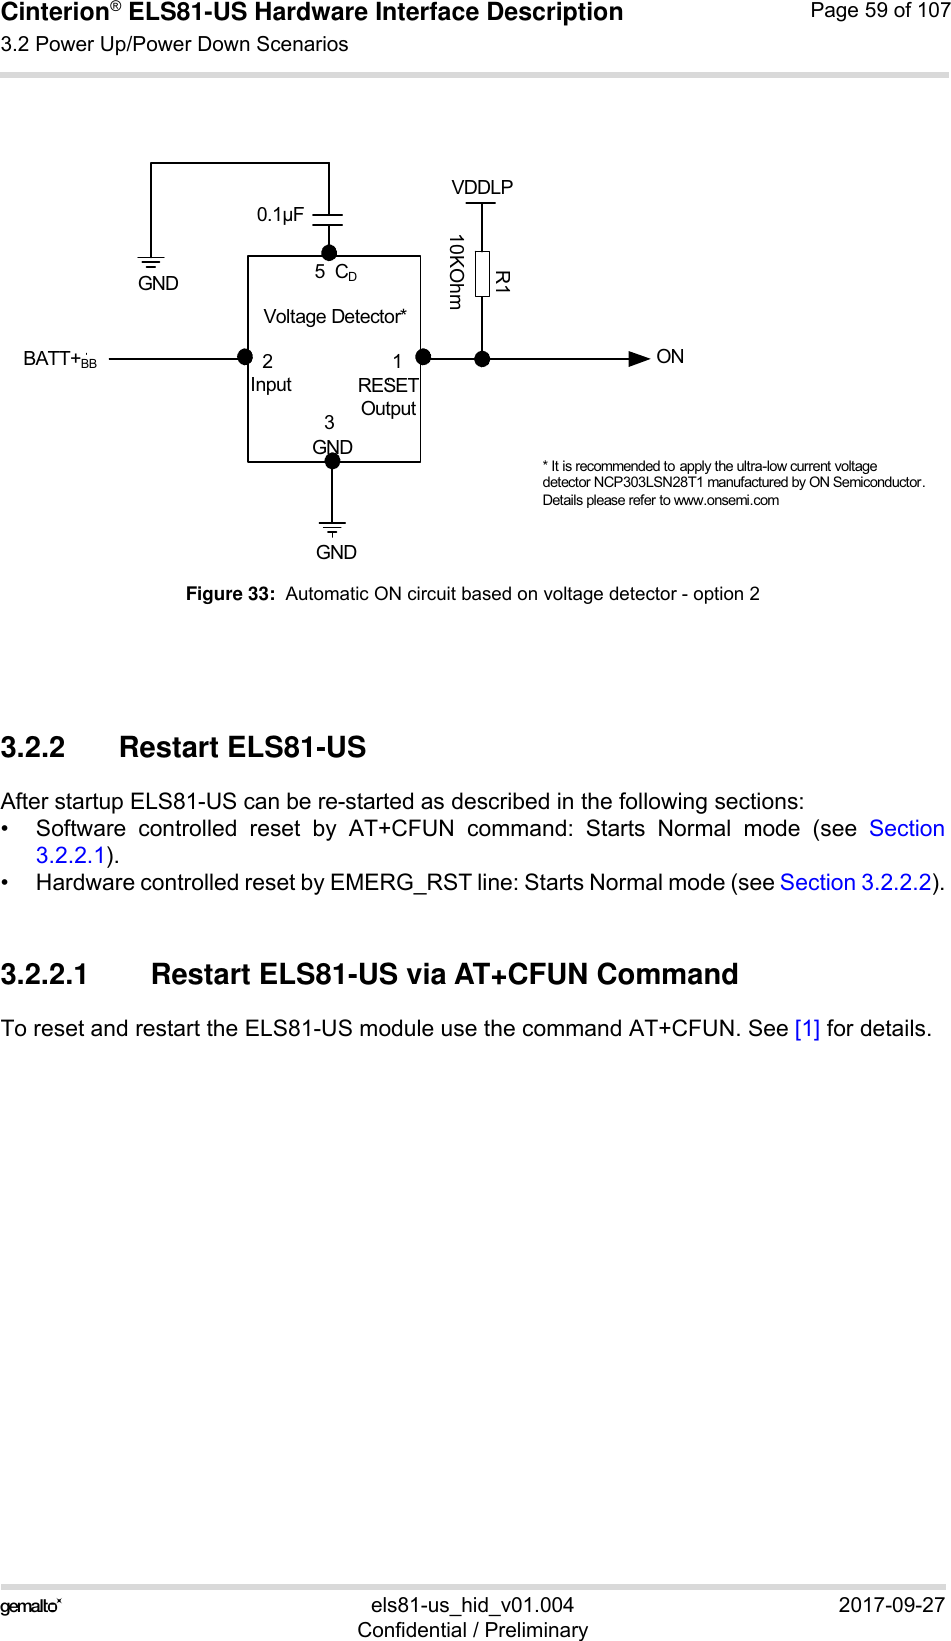 Cinterion® ELS81-US Hardware Interface Description3.2 Power Up/Power Down Scenarios77els81-us_hid_v01.004 2017-09-27Confidential / PreliminaryPage 59 of 107Figure 33:  Automatic ON circuit based on voltage detector - option 23.2.2 Restart ELS81-US After startup ELS81-US can be re-started as described in the following sections:• Software controlled reset by AT+CFUN command: Starts Normal mode (see Section3.2.2.1).• Hardware controlled reset by EMERG_RST line: Starts Normal mode (see Section 3.2.2.2).3.2.2.1 Restart ELS81-US via AT+CFUN CommandTo reset and restart the ELS81-US module use the command AT+CFUN. See [1] for details. Voltage Detector*BATT+BBGNDONVDDLP* It is recommended to apply the ultra-low current voltage detector NCP303LSN28T1 manufactured by ON Semiconductor. Details please refer to www.onsemi.comInput RESETOutputGNDR110KOhm2130.1μFGND 5  CD